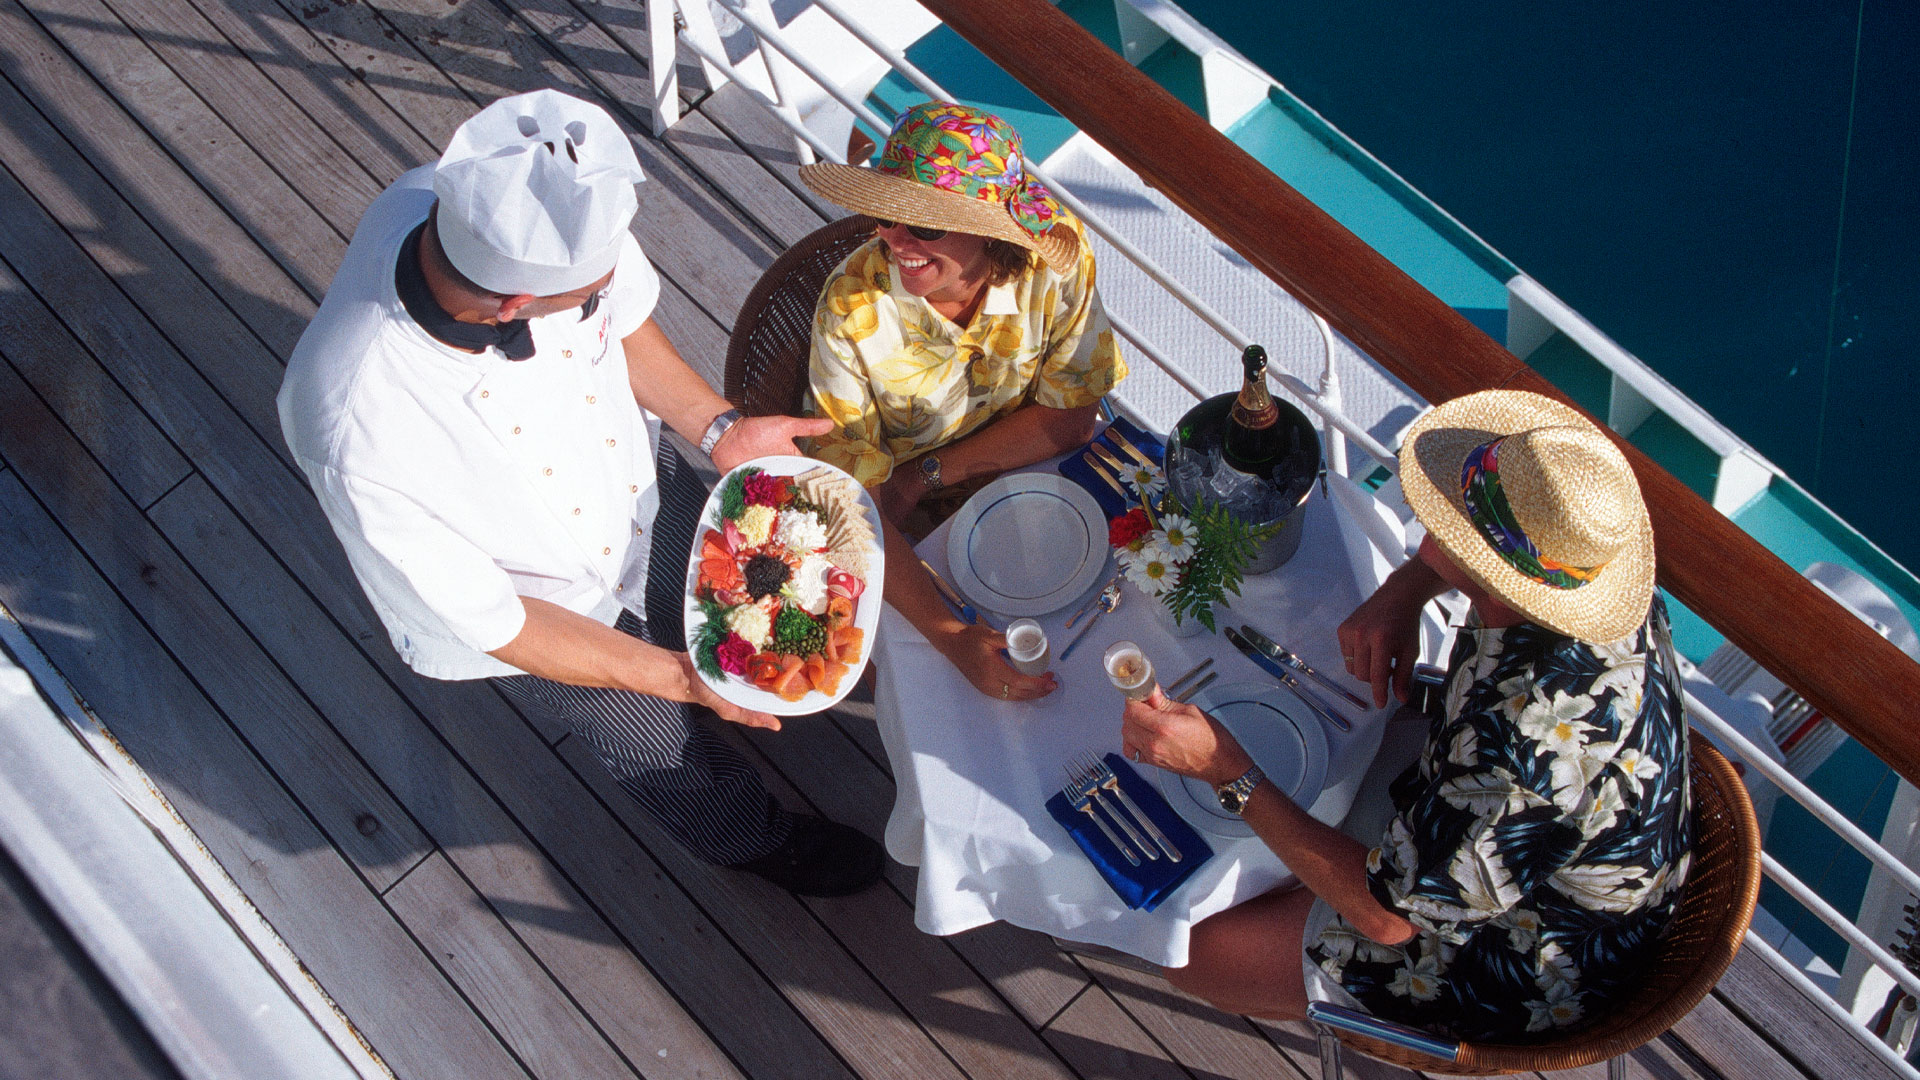 Yacht chef delivering food to customers who are eating out on the deck.